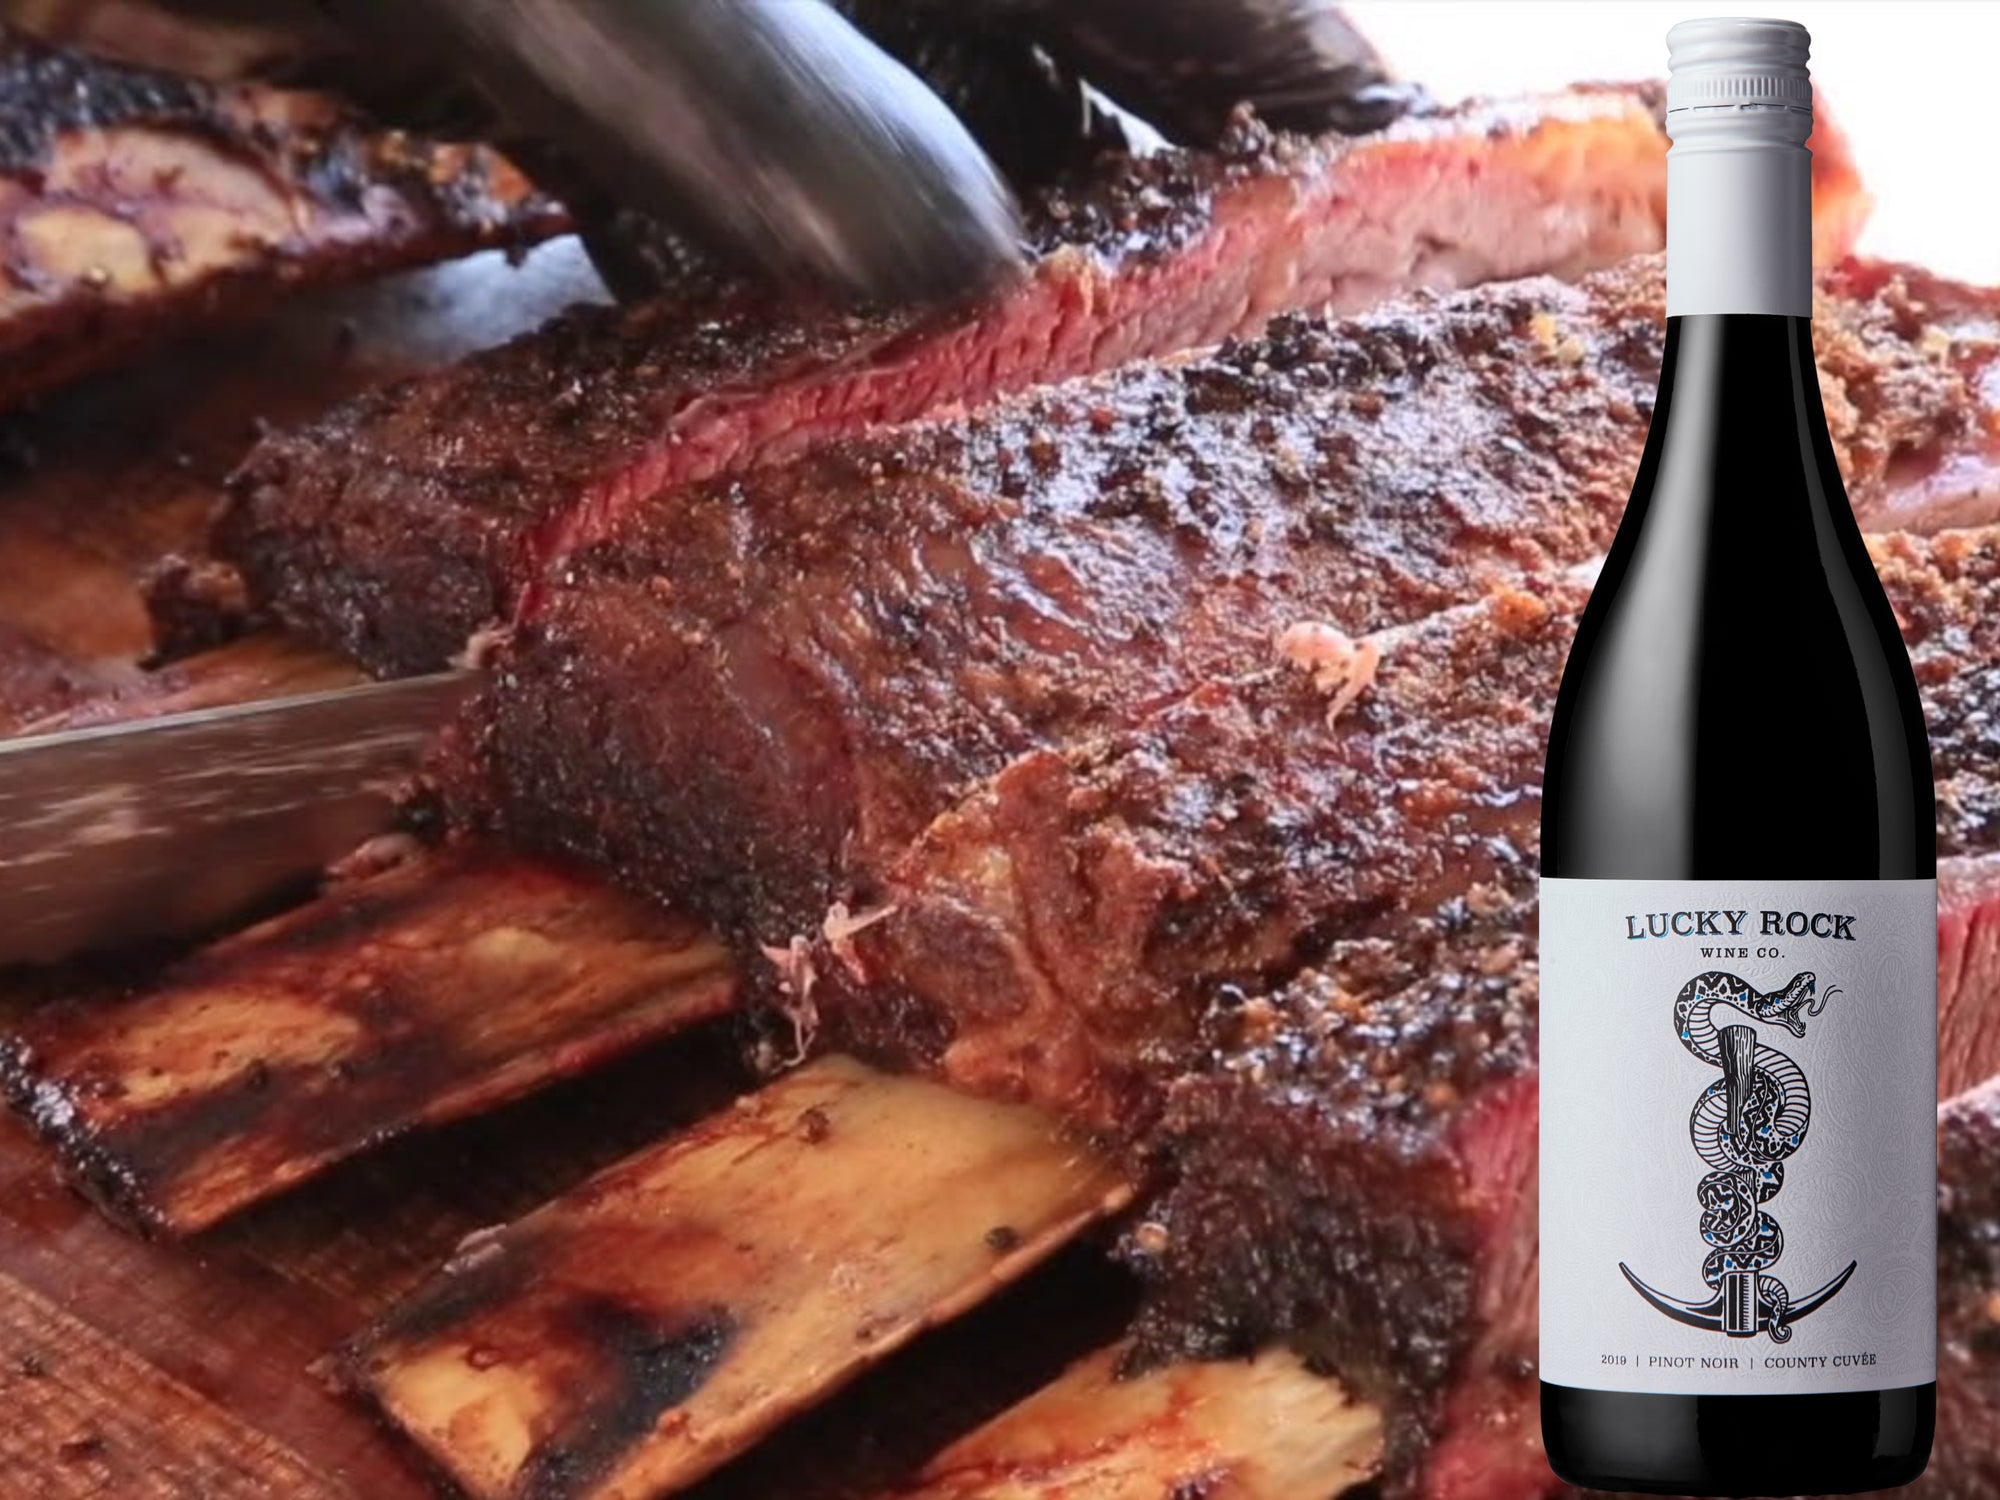 Grilling Meat, Smoking Meat, and Pairing Wine Oh My!